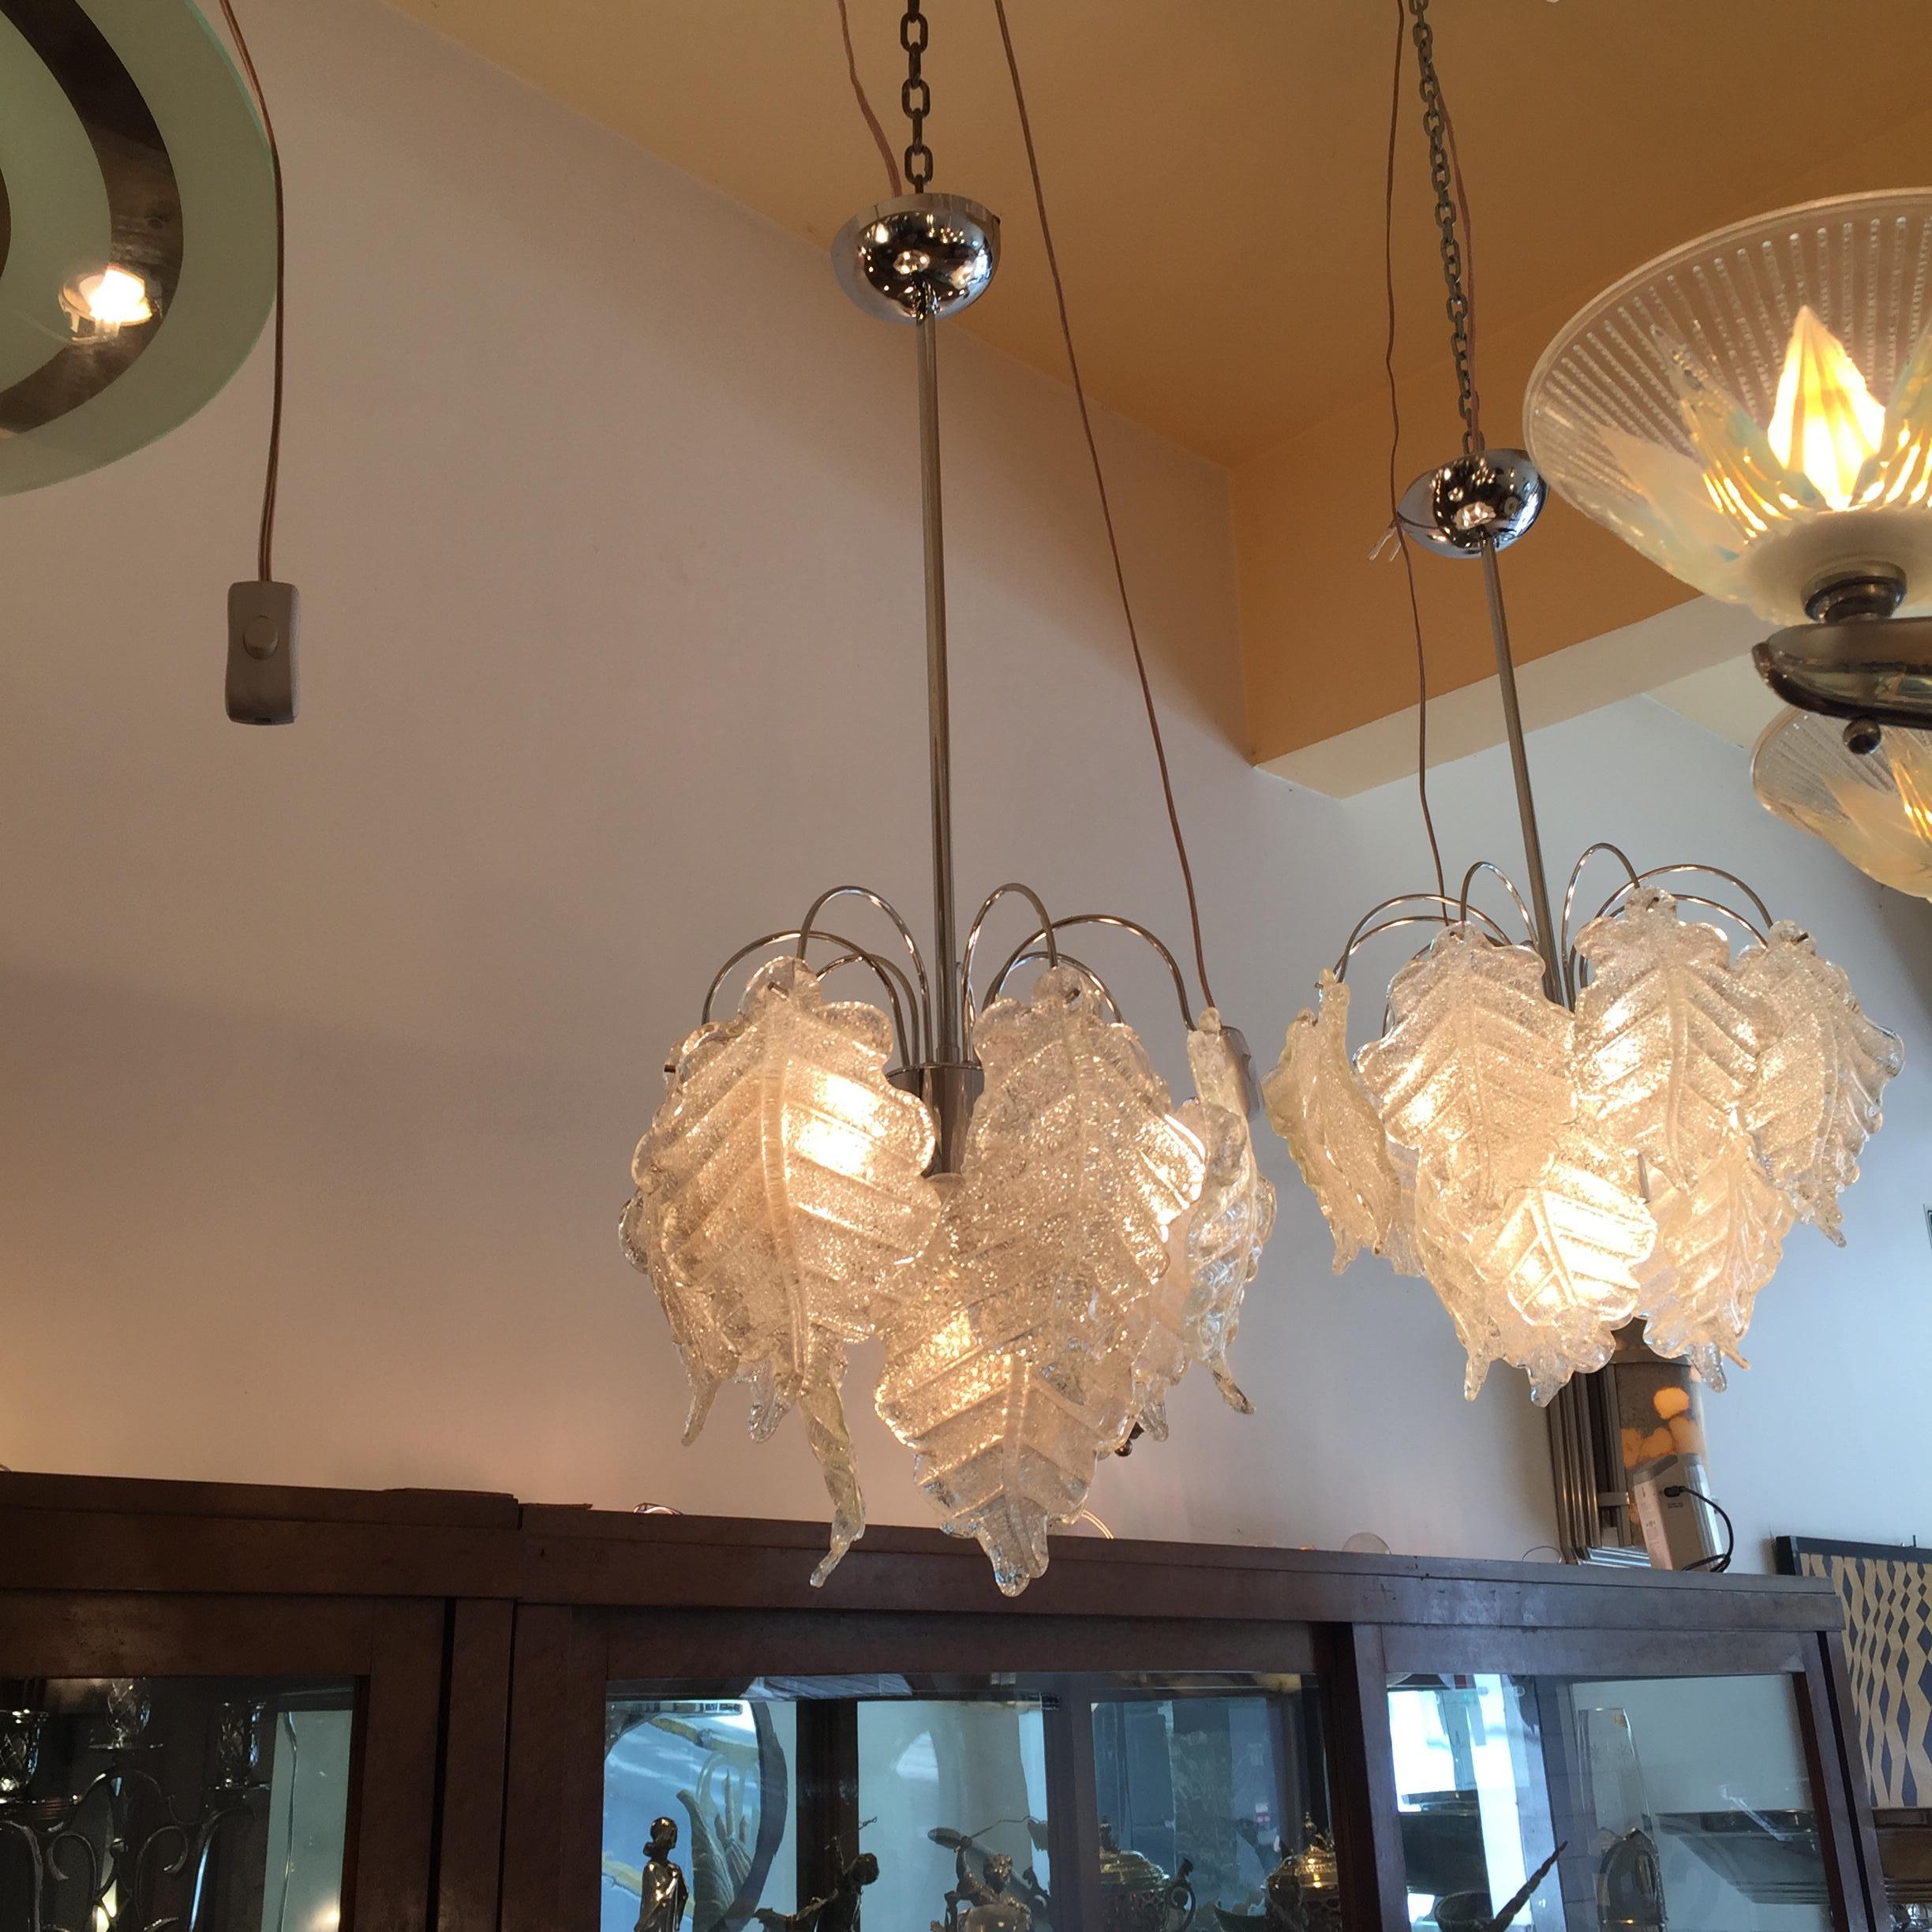 Hanging lamp.
Country: Italian
To take care of your property and the lives of our customers, the new wiring has been done.
We have specialized in the sale of Art Deco and Art Nouveau and Vintage styles since 1982. If you have any questions we are at